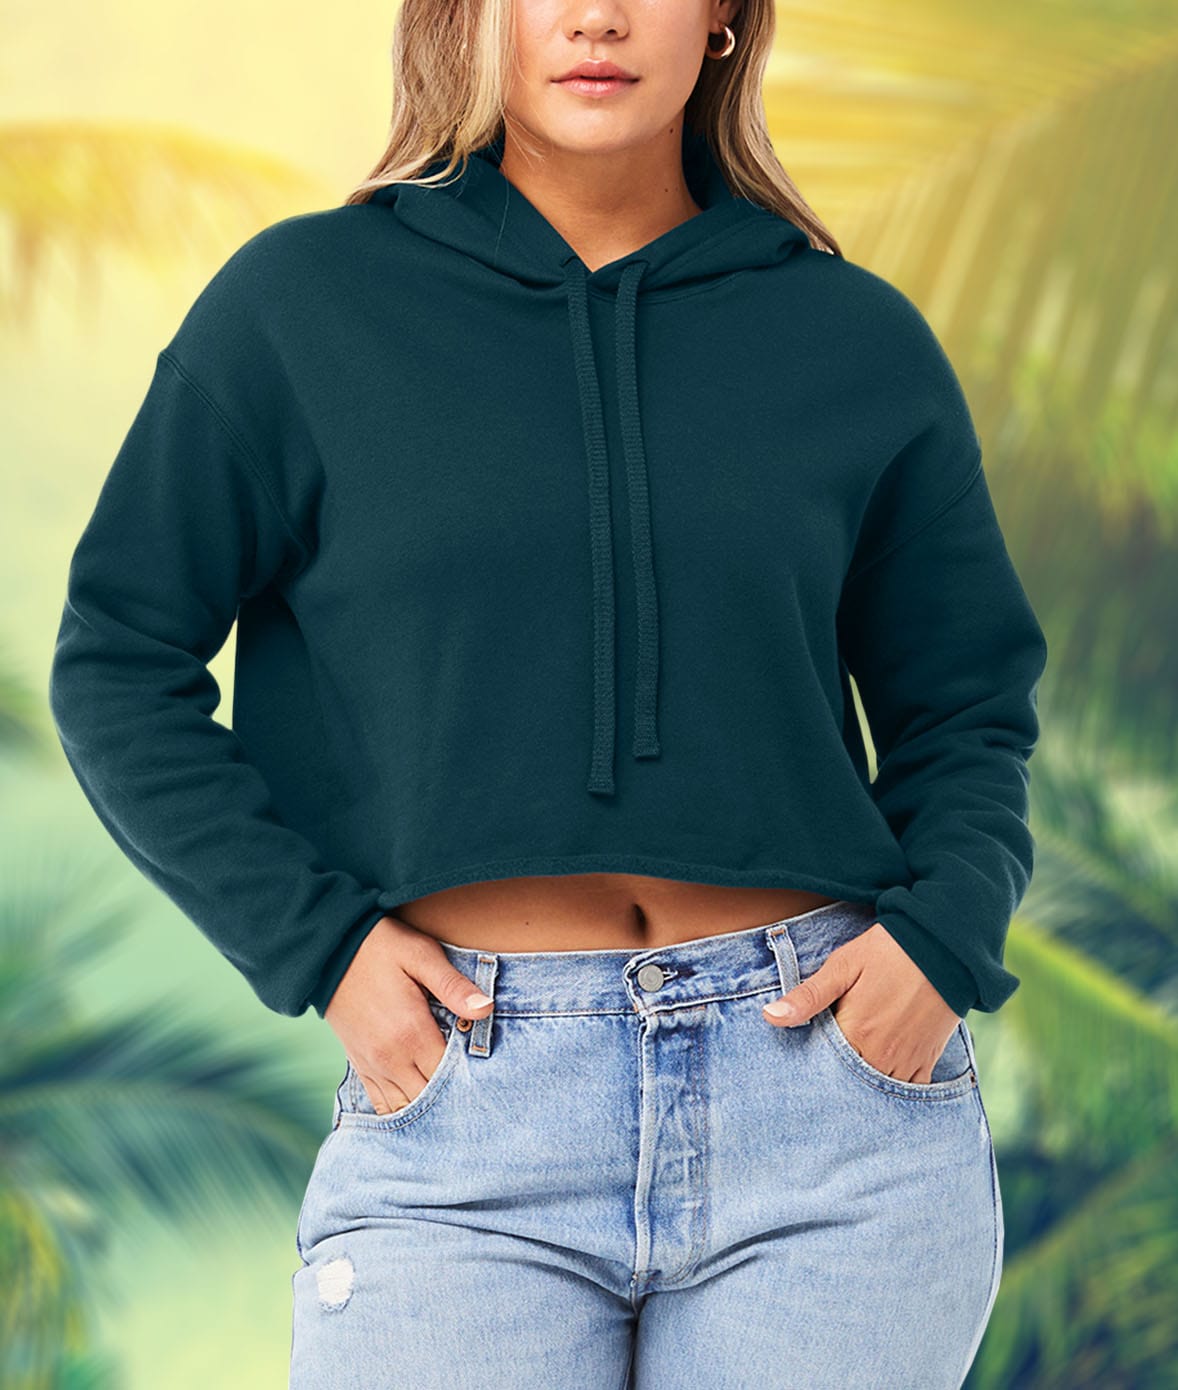 Nayked Apparel Women's Ridiculously Soft Cropped Hoodie